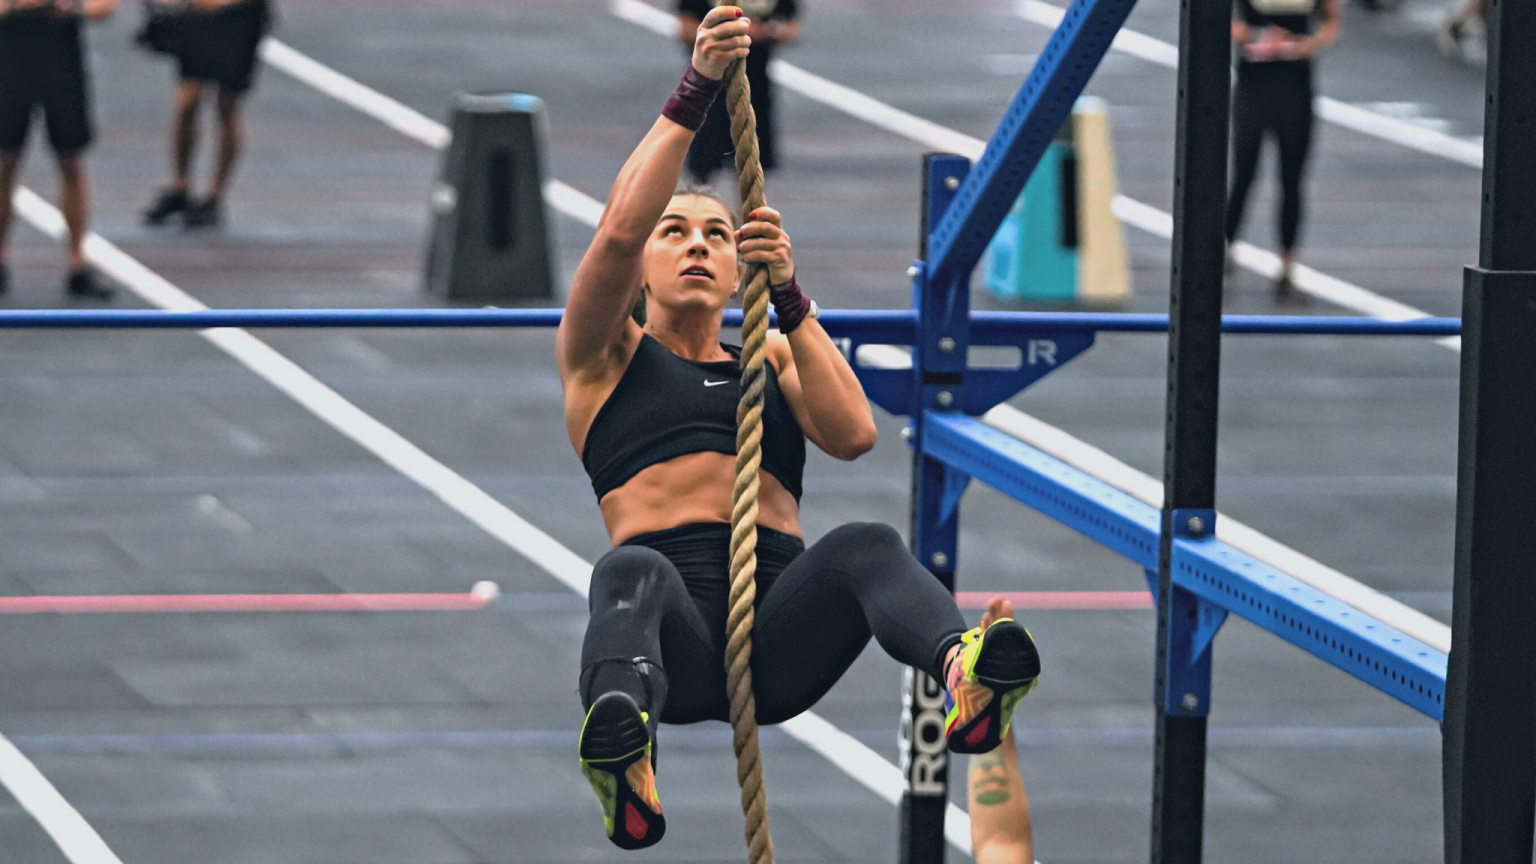 Accessibility: How Easy is it to Start CrossFit vs. Traditional Gym Workouts?